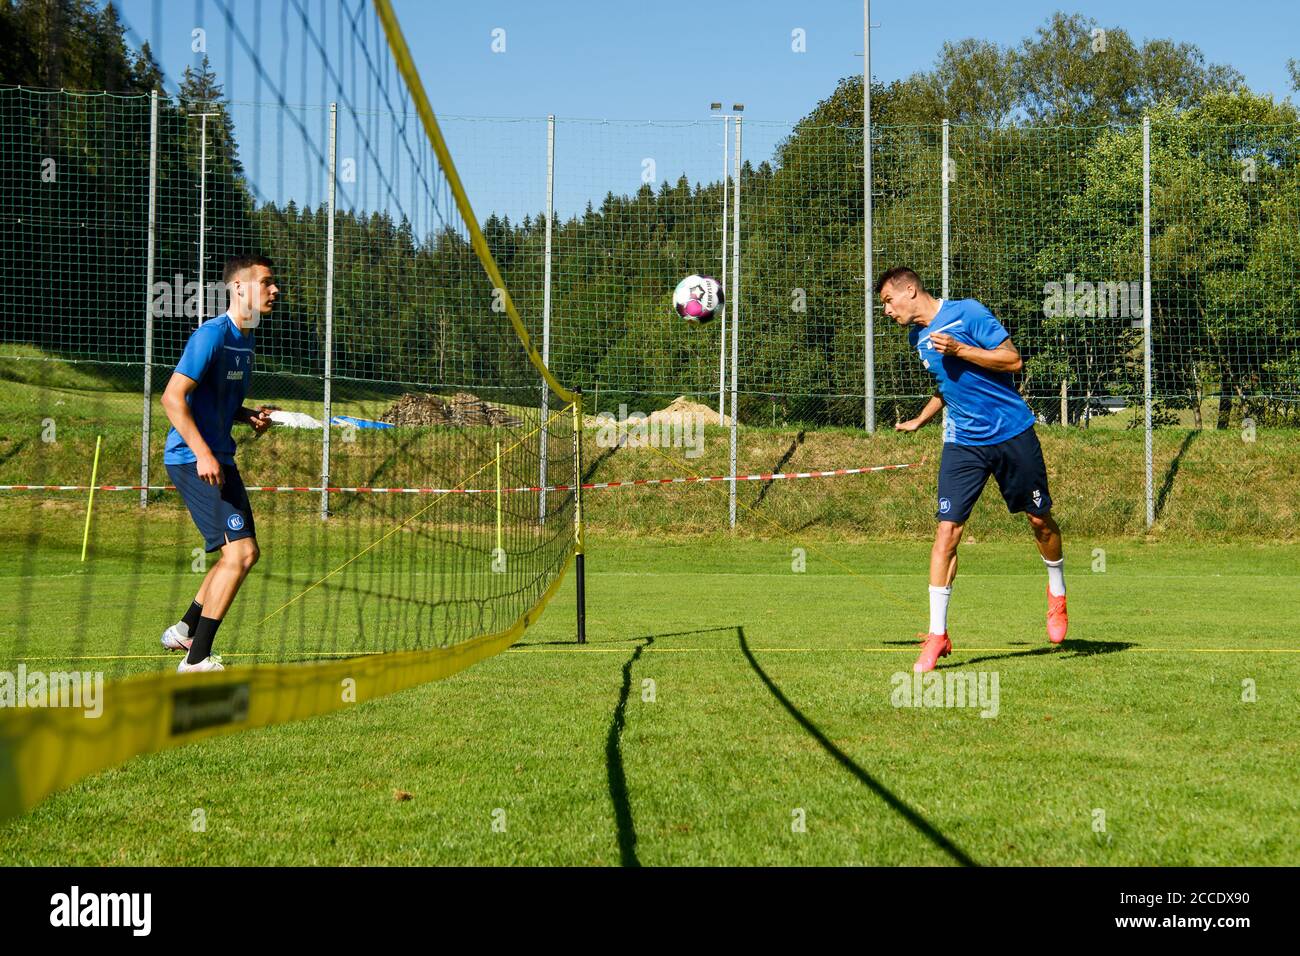 Janis Hanek (KSC, left), Philip Heise (KSC) on the ball. The training session on afterwithtag takes place on a field in Vorderweissach, where the KSC plays football tennis for a change. GES/Football/2. Bundesliga: Karlsruher SC - training camp, August 21, 2020 Football/Soccer: 2. Bundesliga: KSC training camp, Bad Leonfelden, Austria, August 21, 2020 | usage worldwide Stock Photo